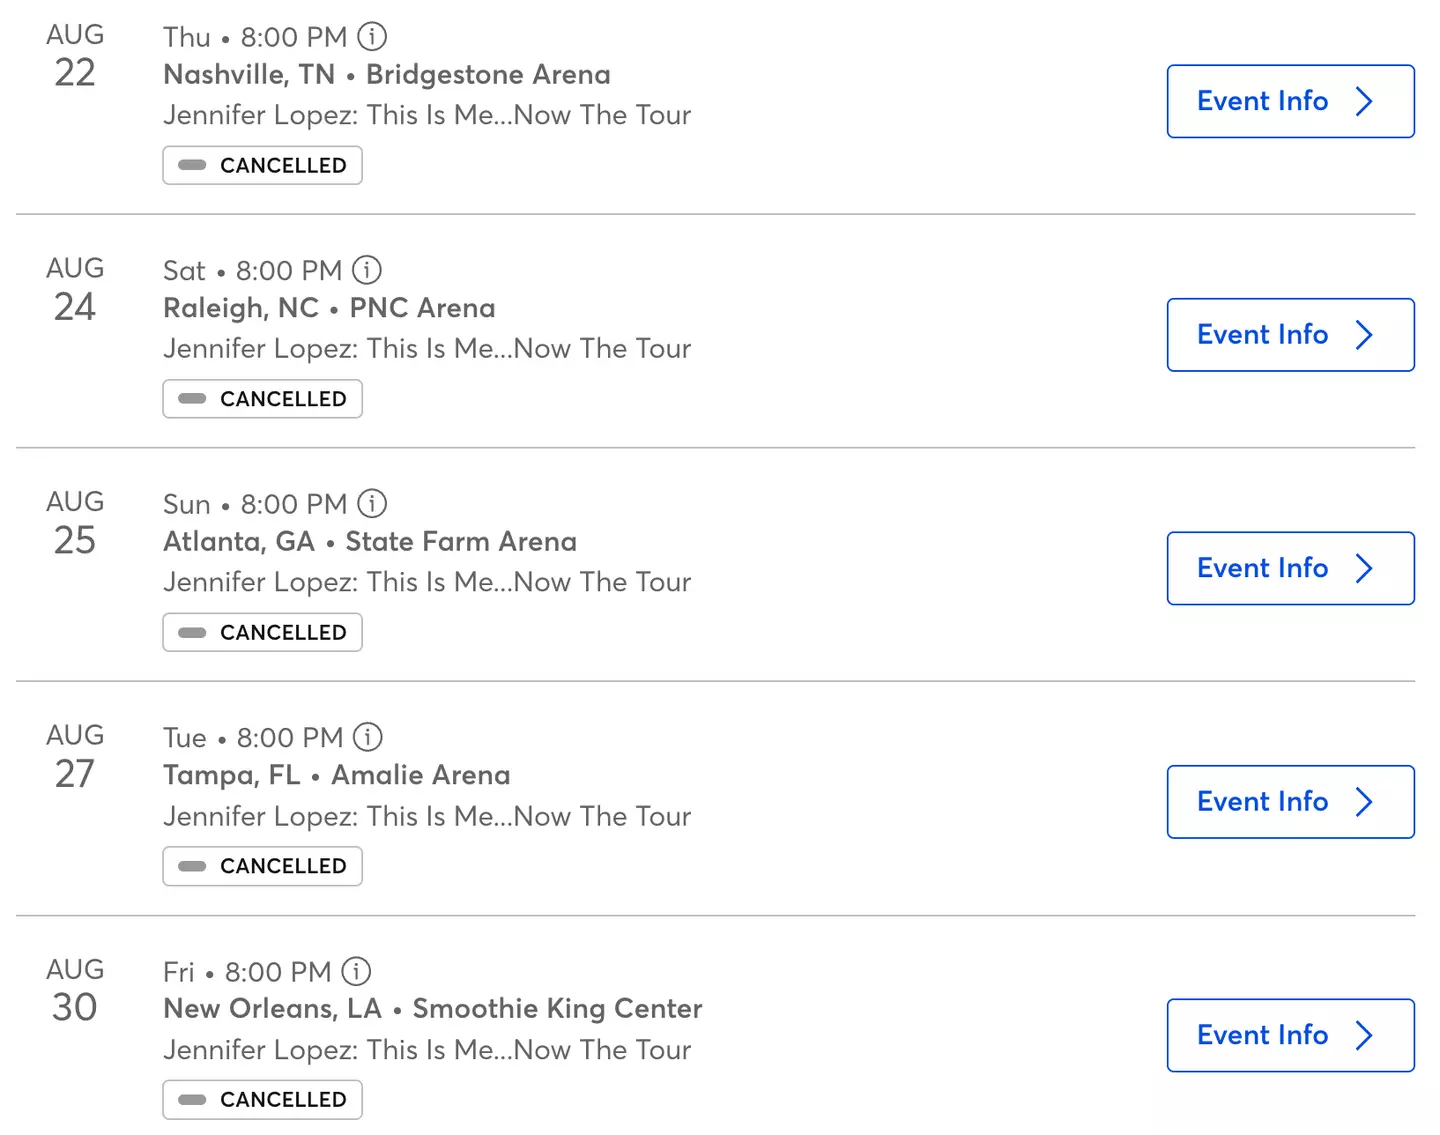 Seven tour dates are marked as cancelled on Ticketmaster